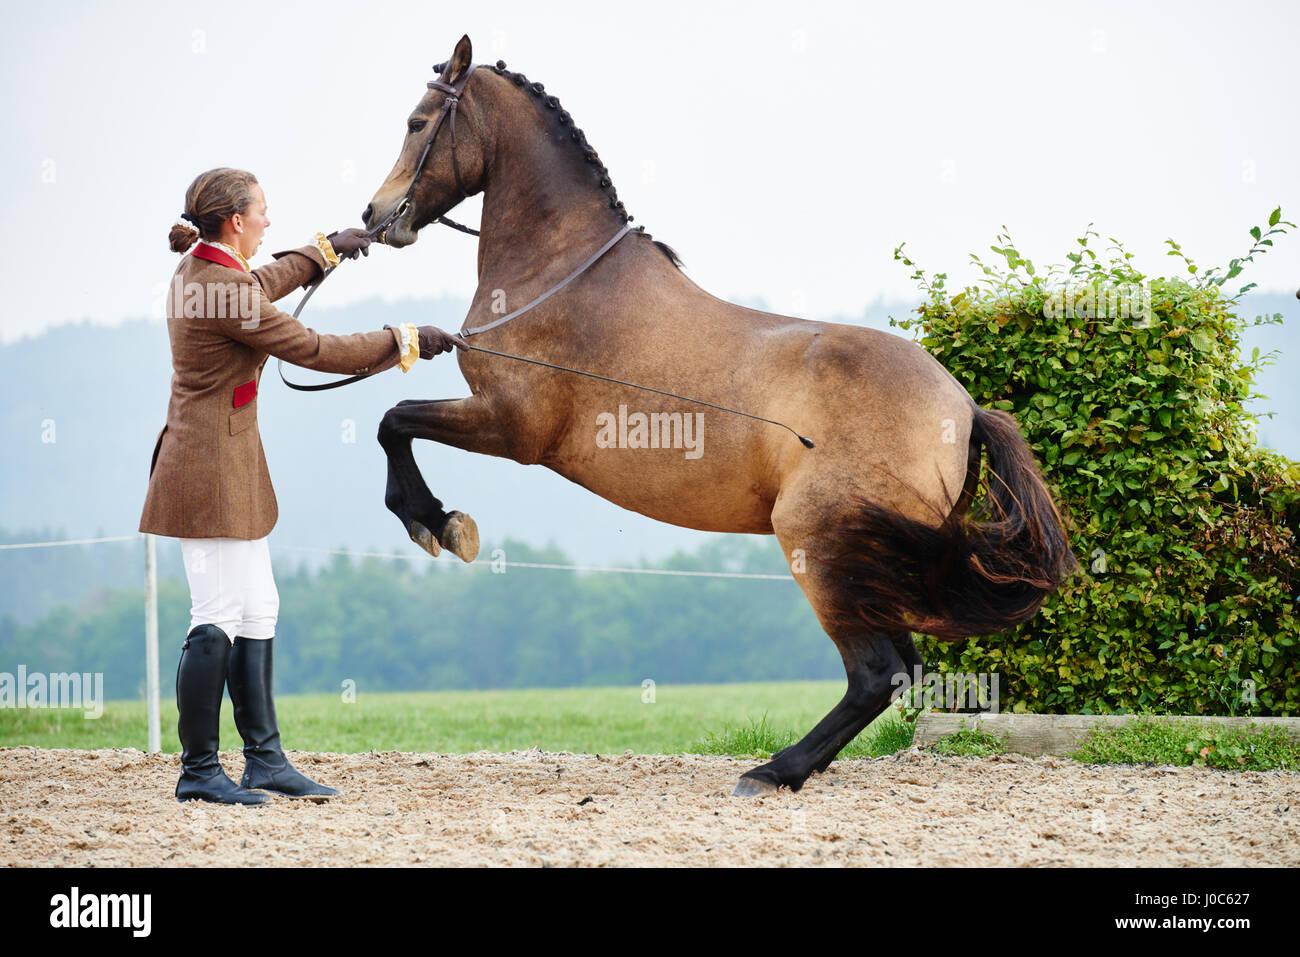 Female rider training dressage horse on hind legs in equestrian arena Stock Photo